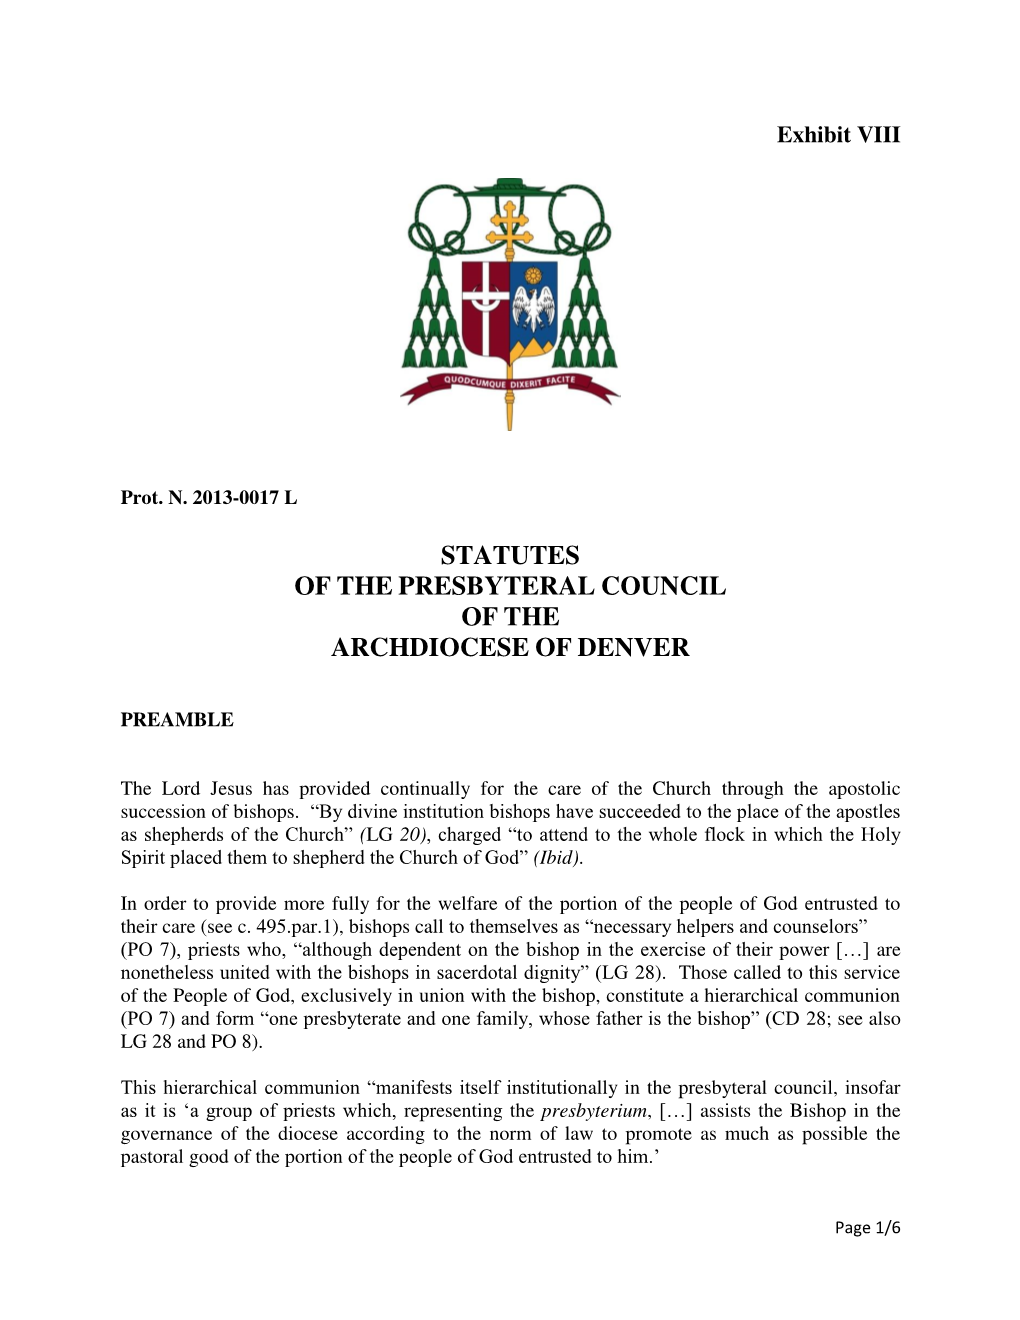 Statutes of the Presbyteral Council of the Archdiocese of Denver